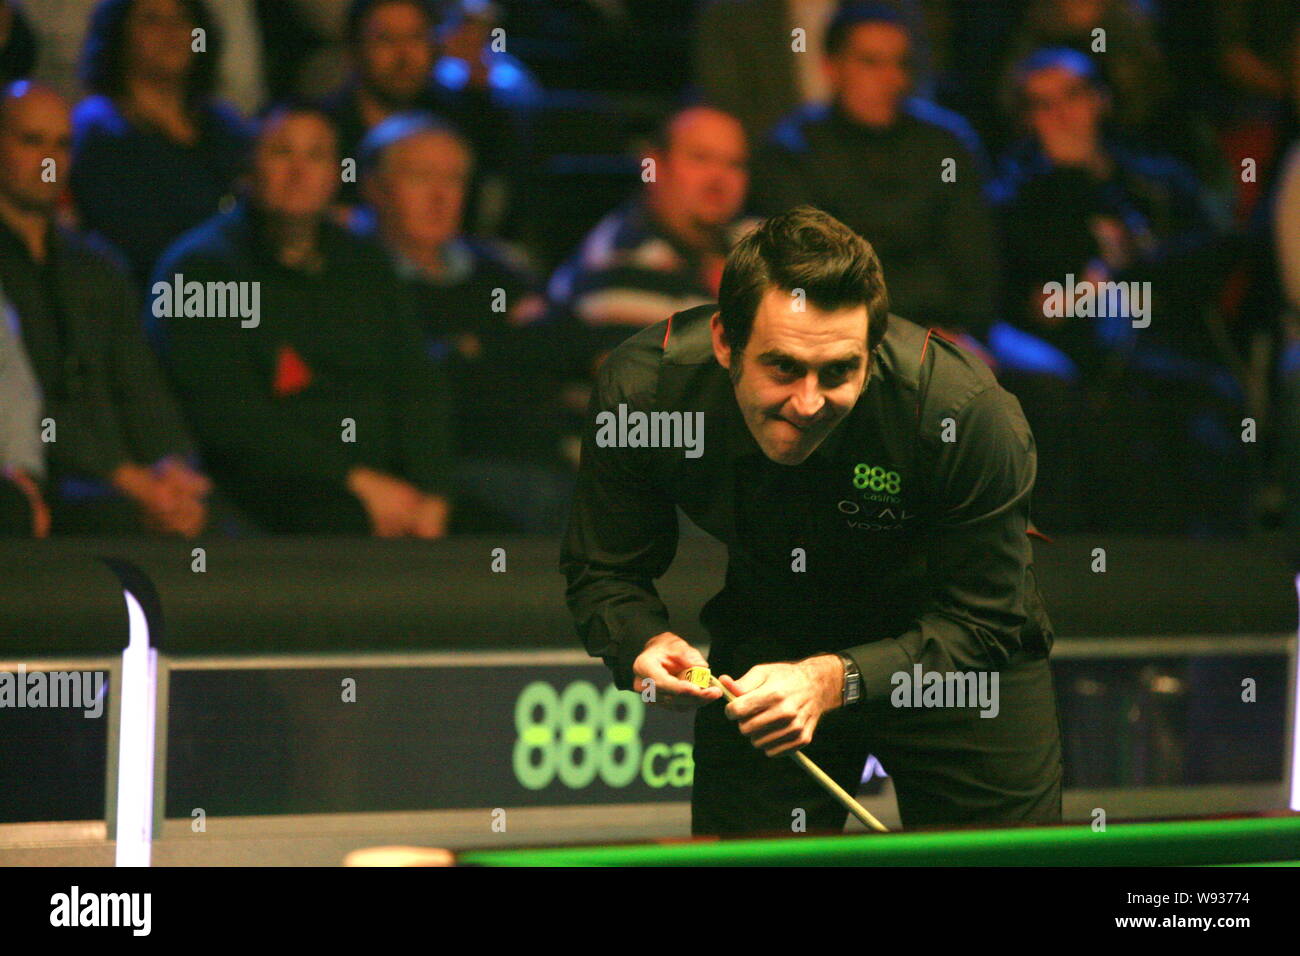 Ronnie OSullivan of England considers a shot against Stuart Bingham of England in the final of the 888casino Champion of Champions Snooker Tournament Stock Photo